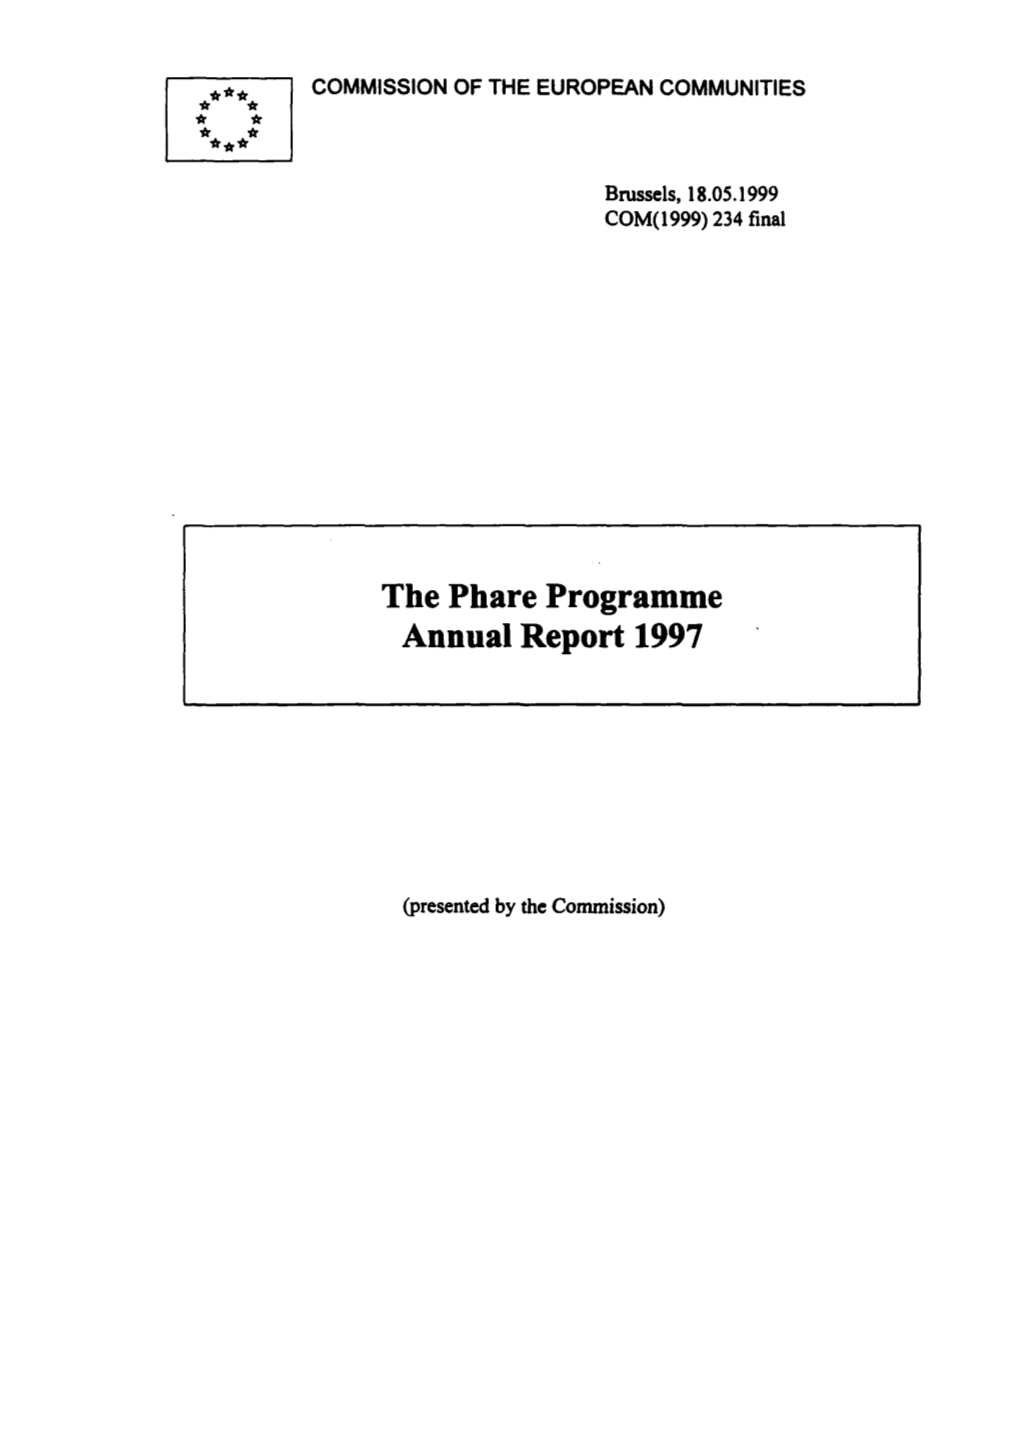 The Phare Programme Annual Report 1997